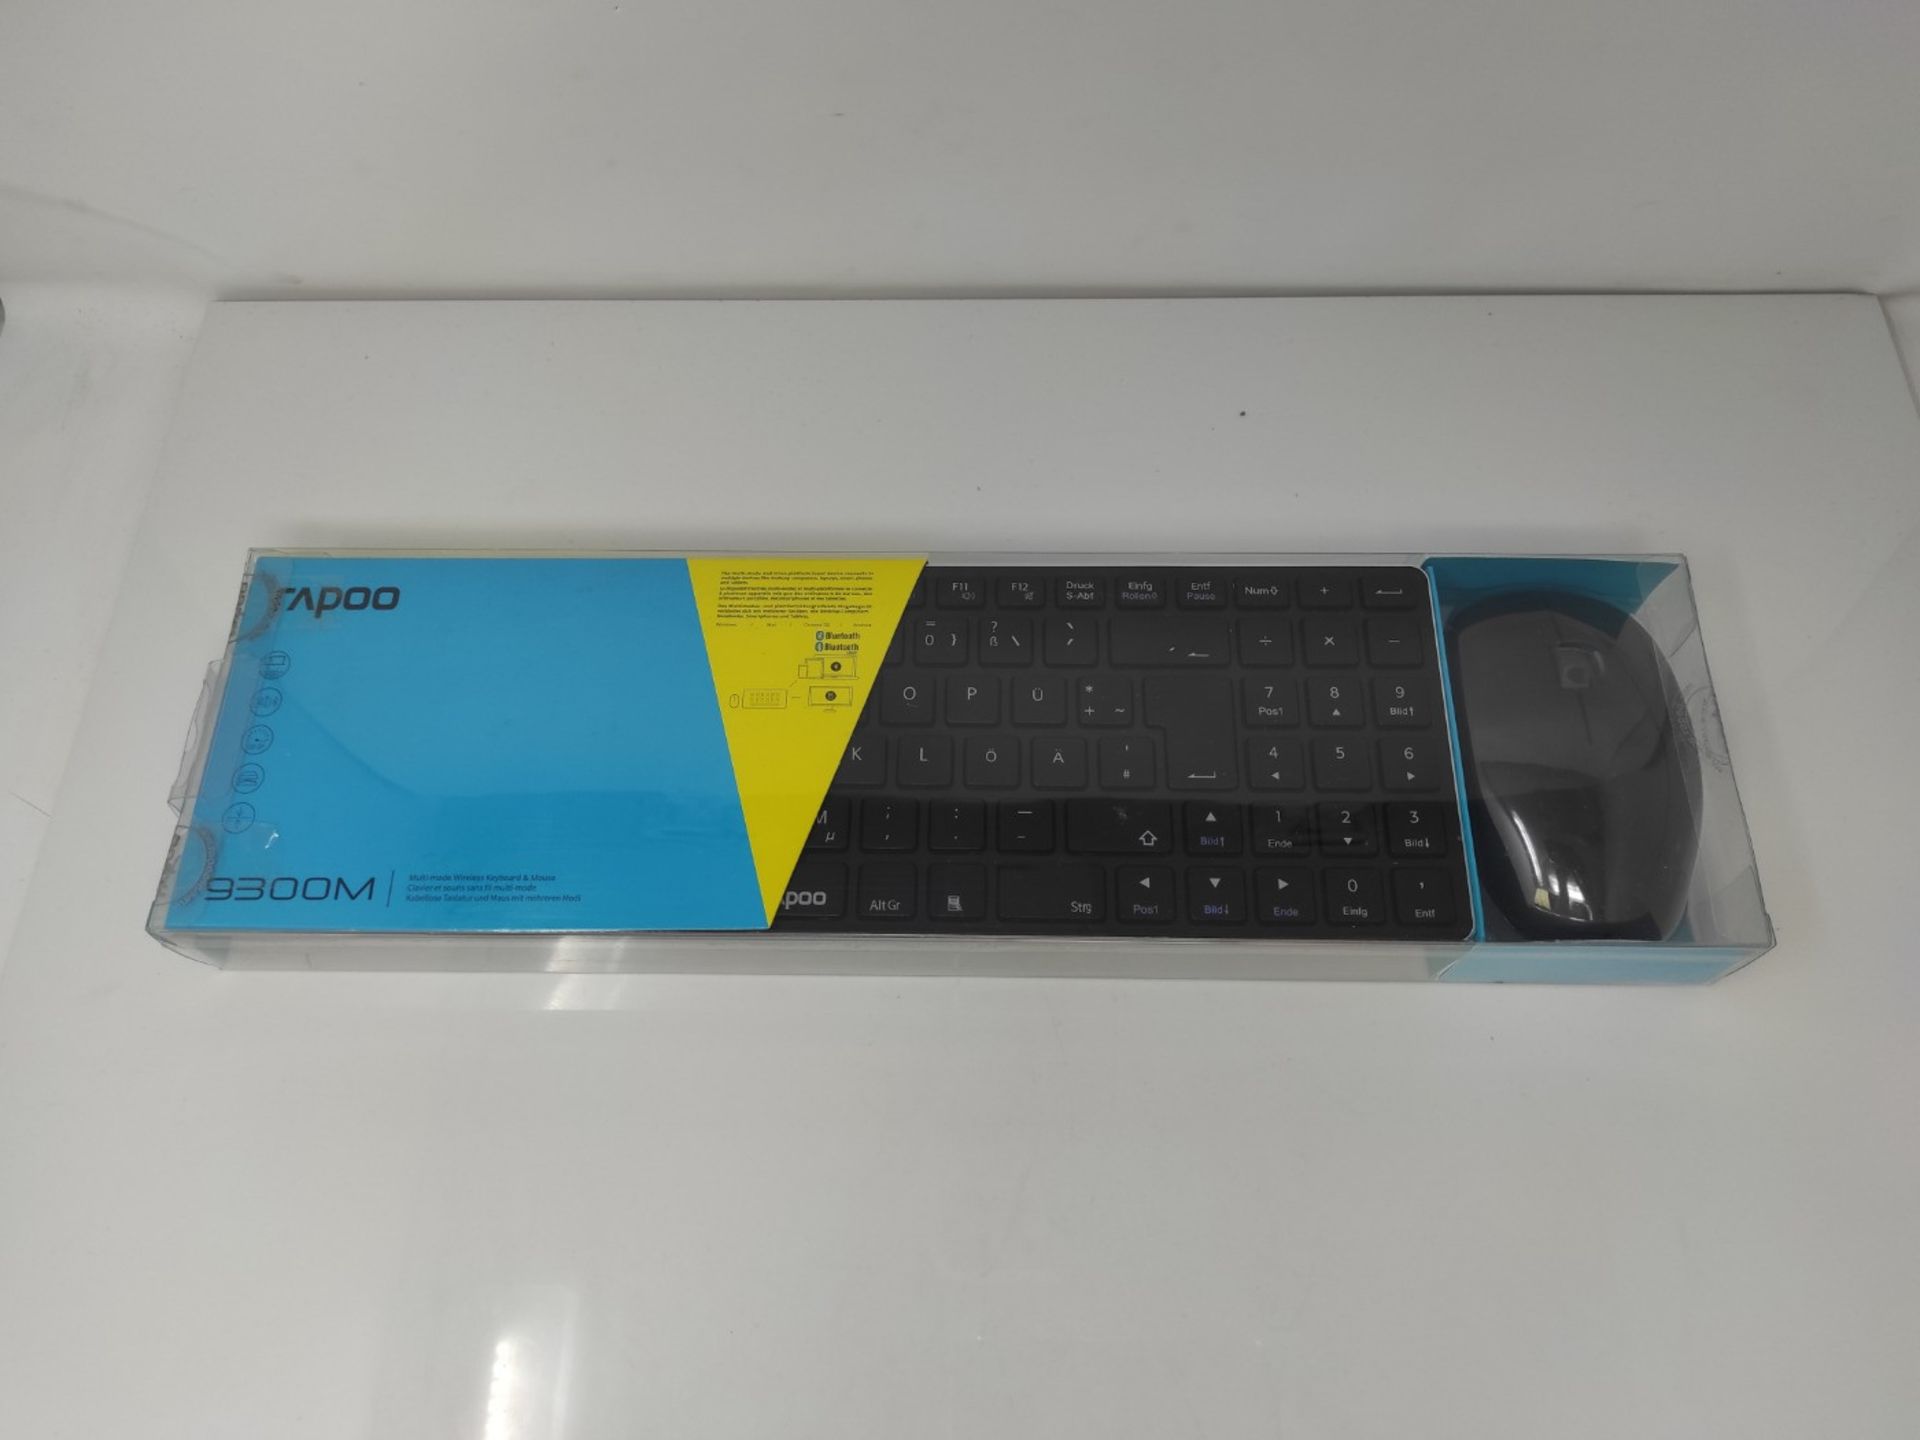 Rapoo 9300M Wireless Keyboard Mouse Set, Bluetooth and Wireless (2.4 GHz) via USB, Ult - Image 2 of 3